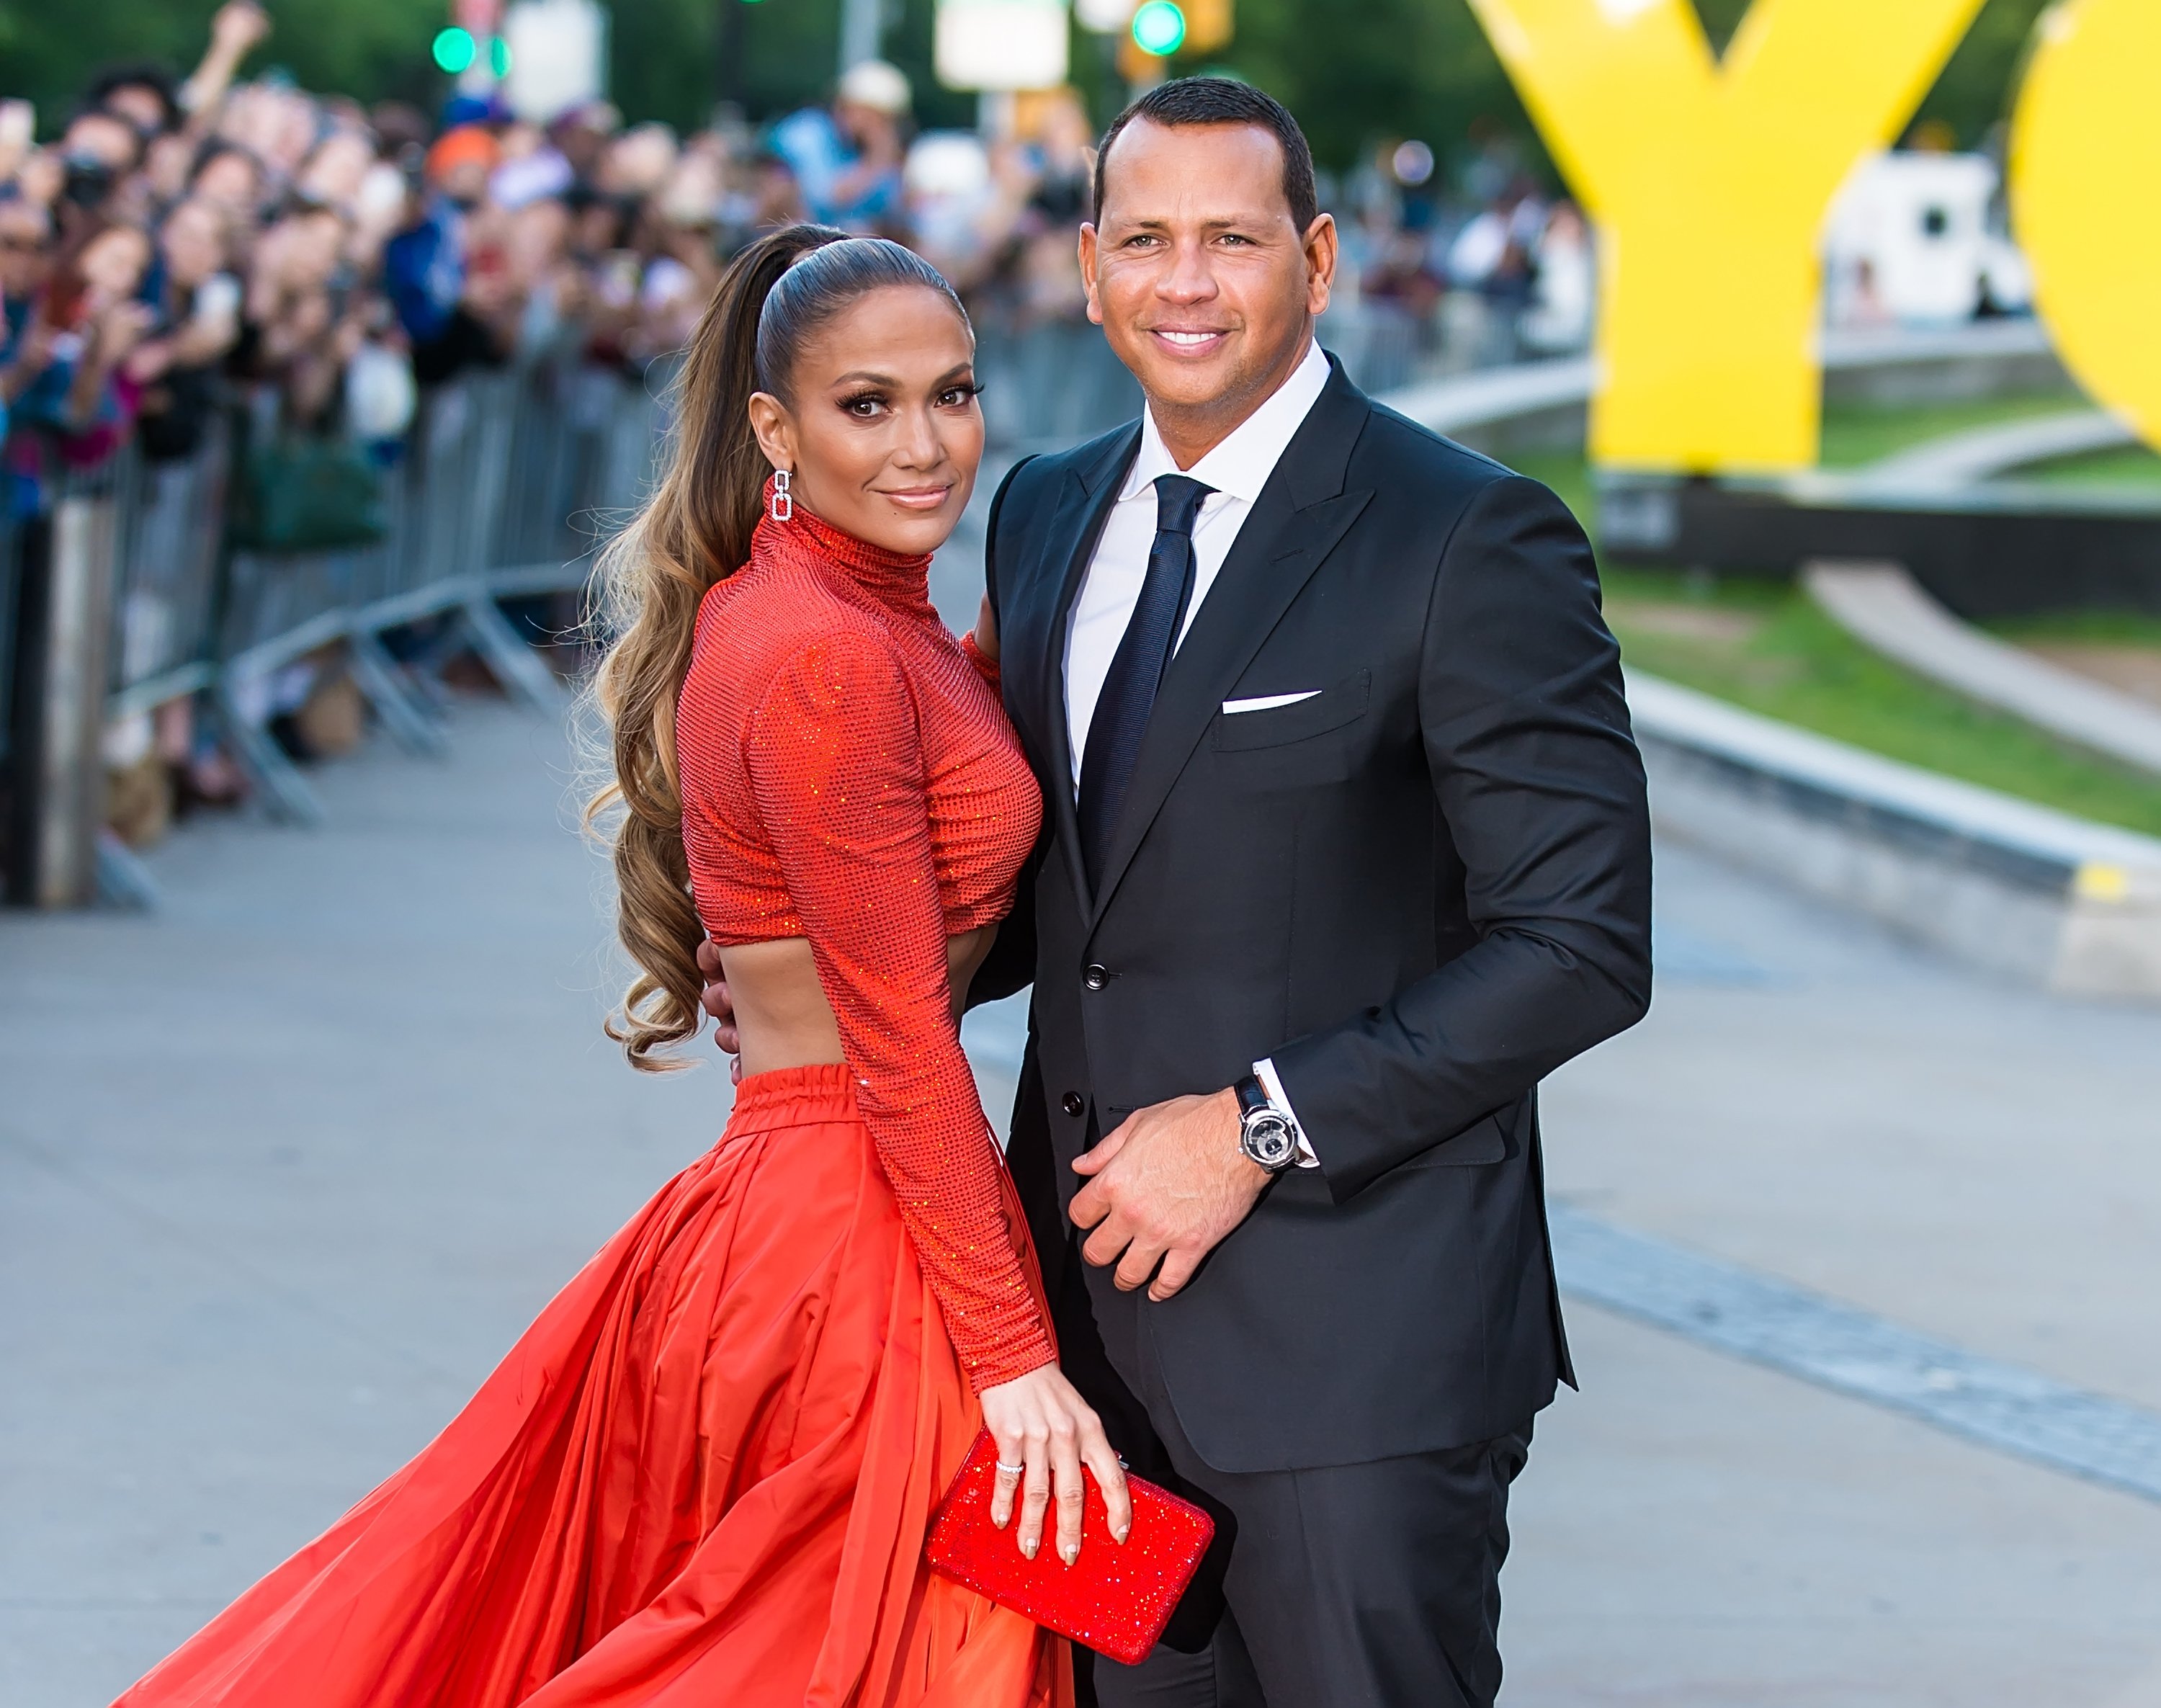 Jennifer Lopez and Alex Rodriguez pictured at the 2019 CFDA Fashion Awards.  Photo: Getty Images